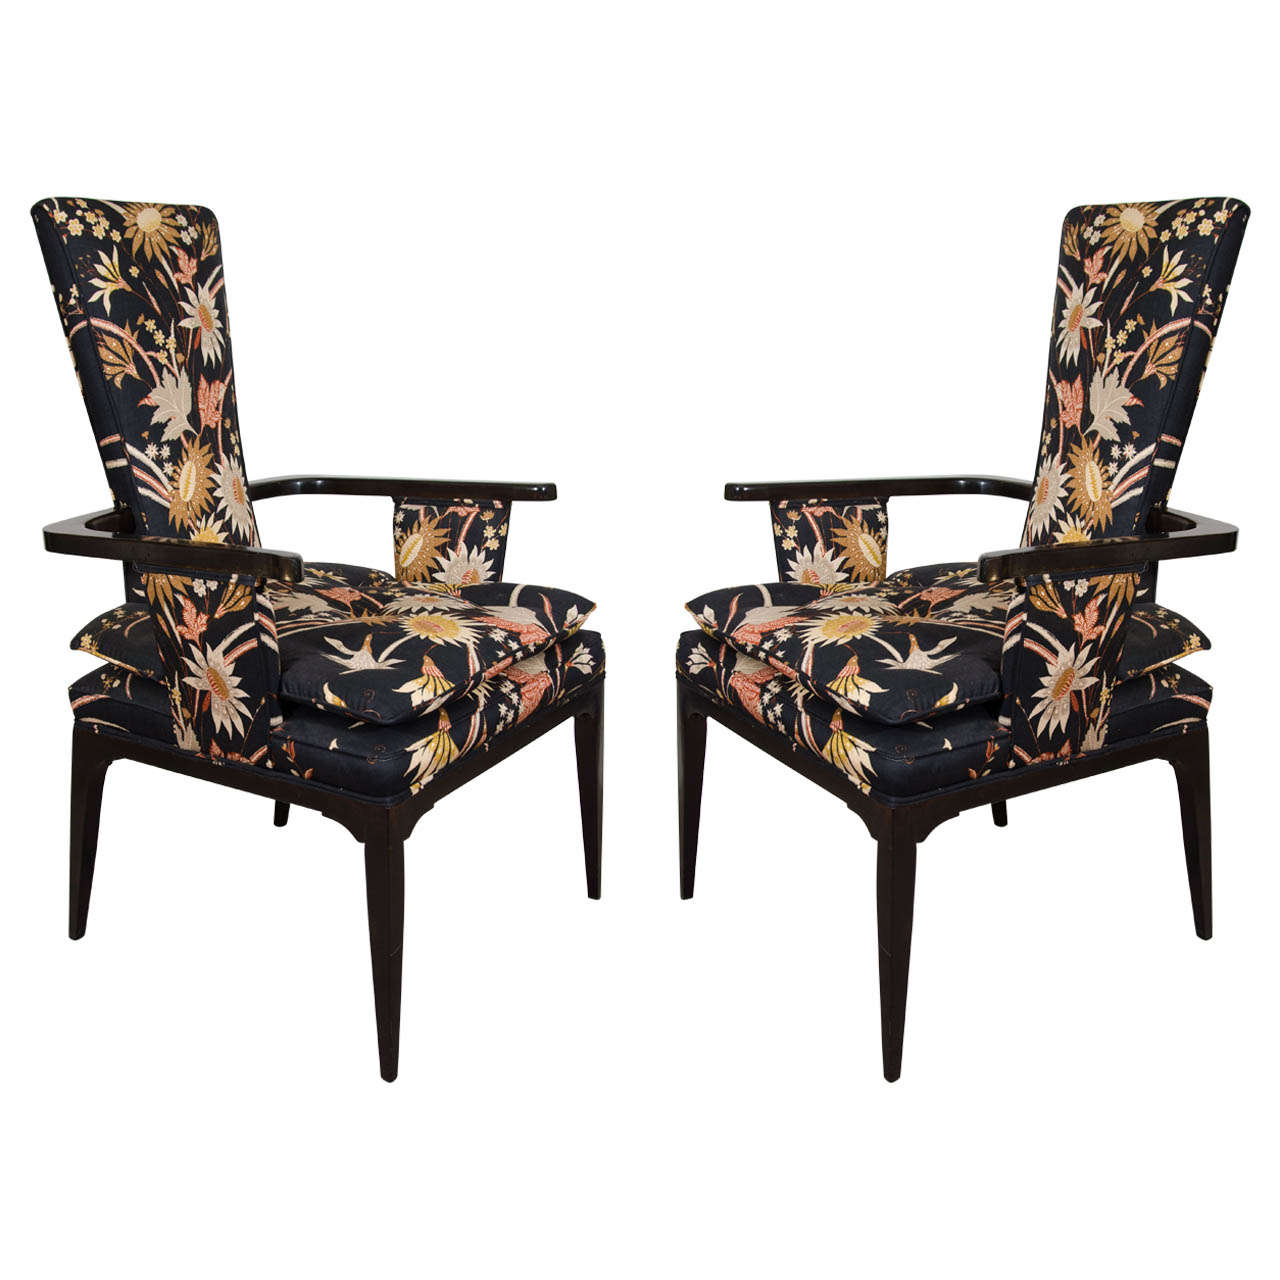 A Pair of Hollywood Regency Style Armchairs in the Style of Tommi Parzinger